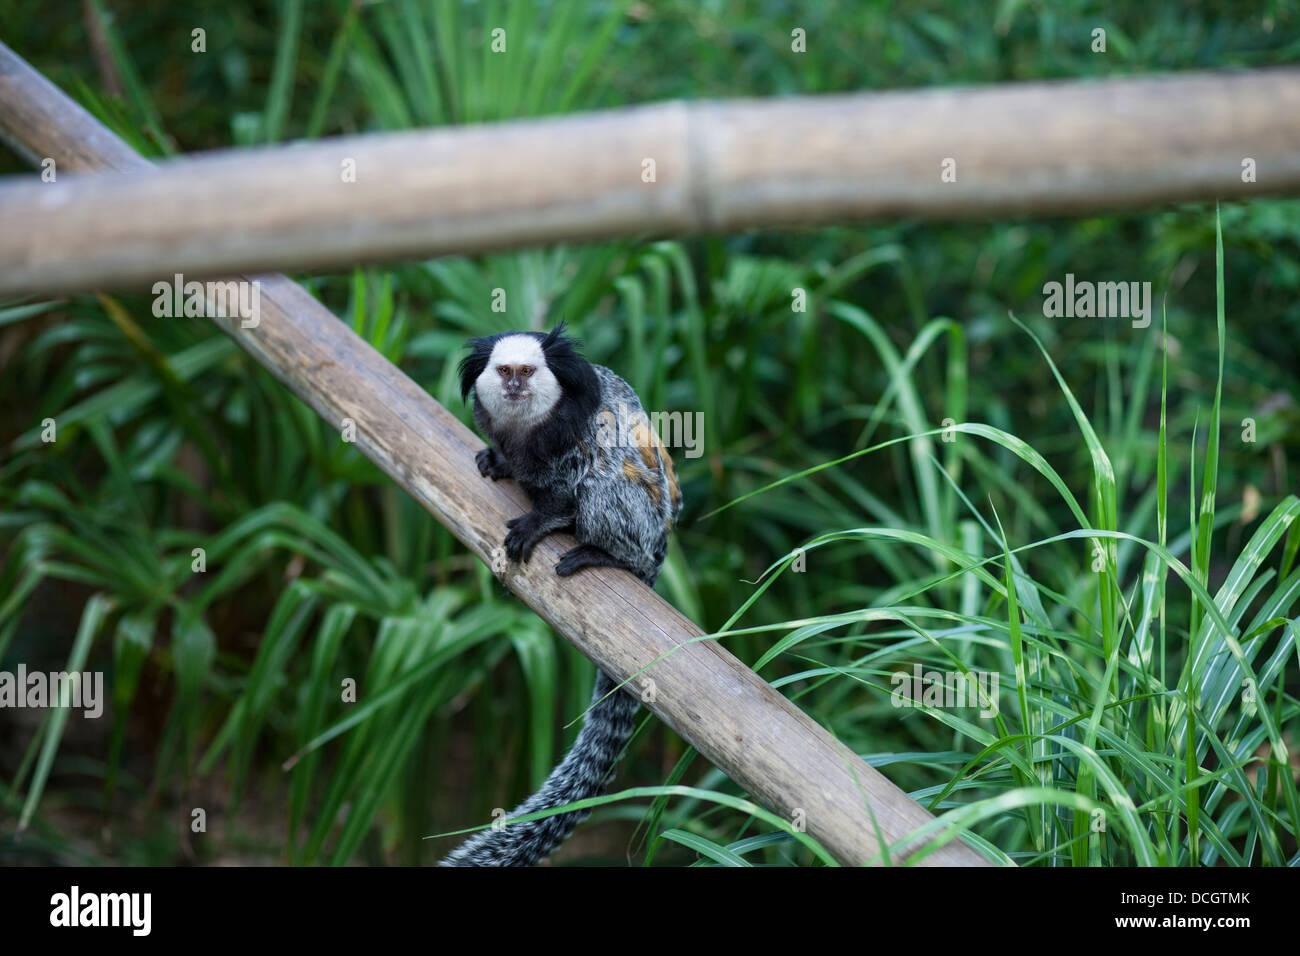 Small black and white monkey with striped tail at Colchester zoo Stock Photo